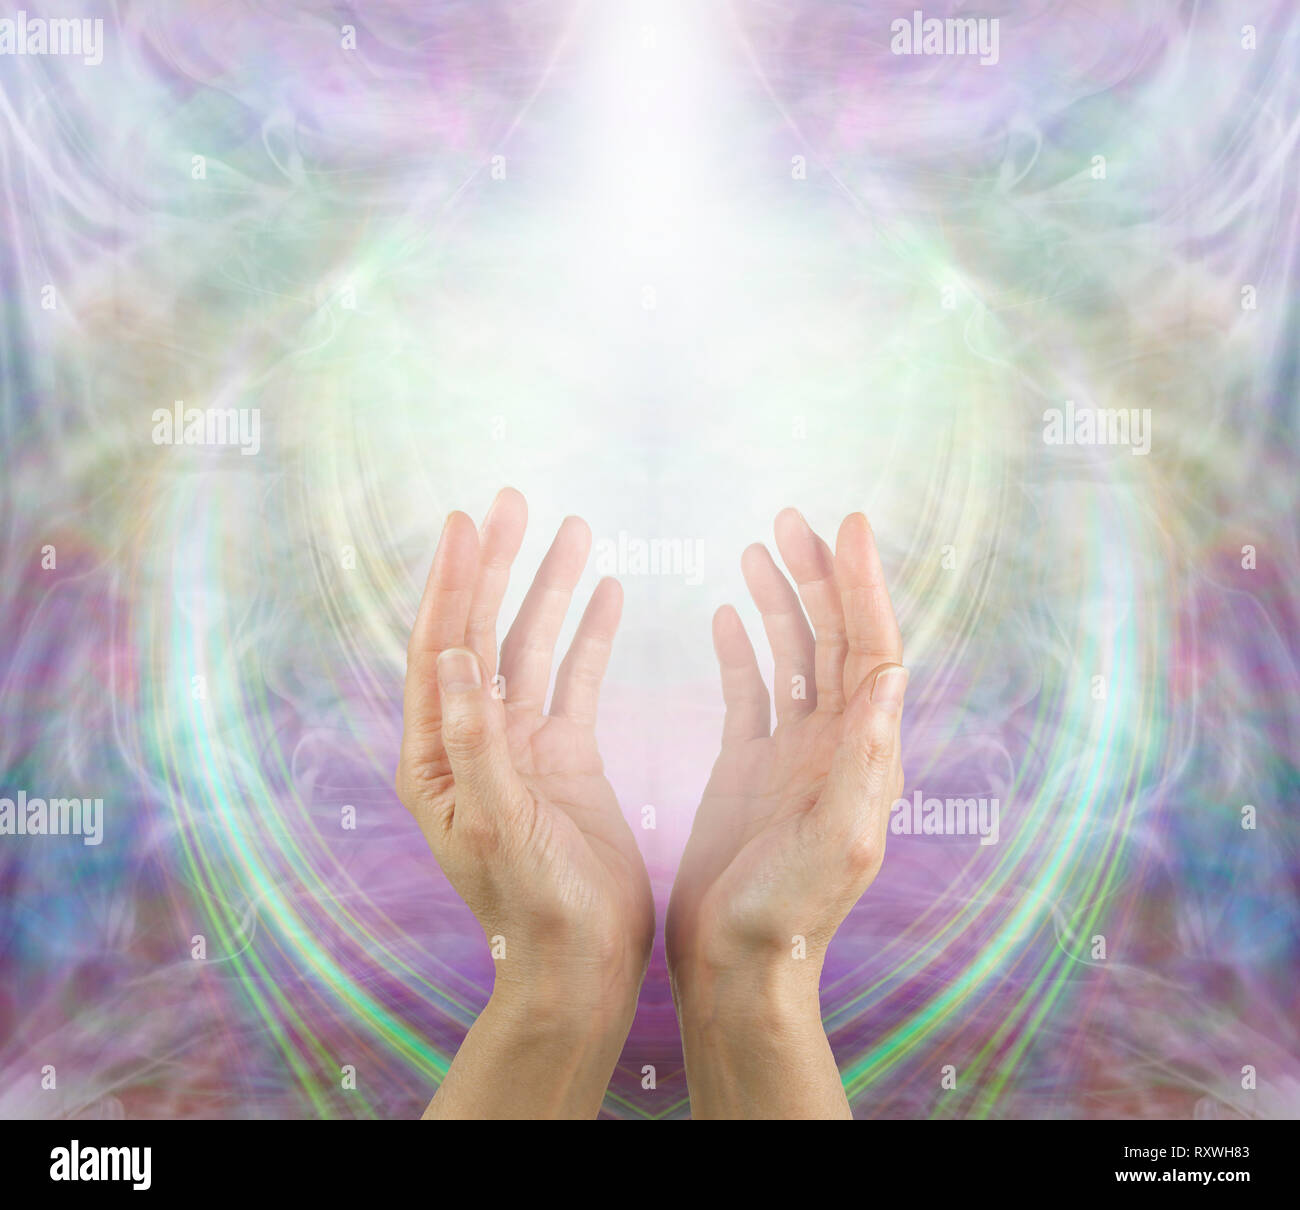 Ask Believe Receive in the Power of Love - female with hands reaching up into a white light against a beautiful angelic ethereal cup shaped background Stock Photo